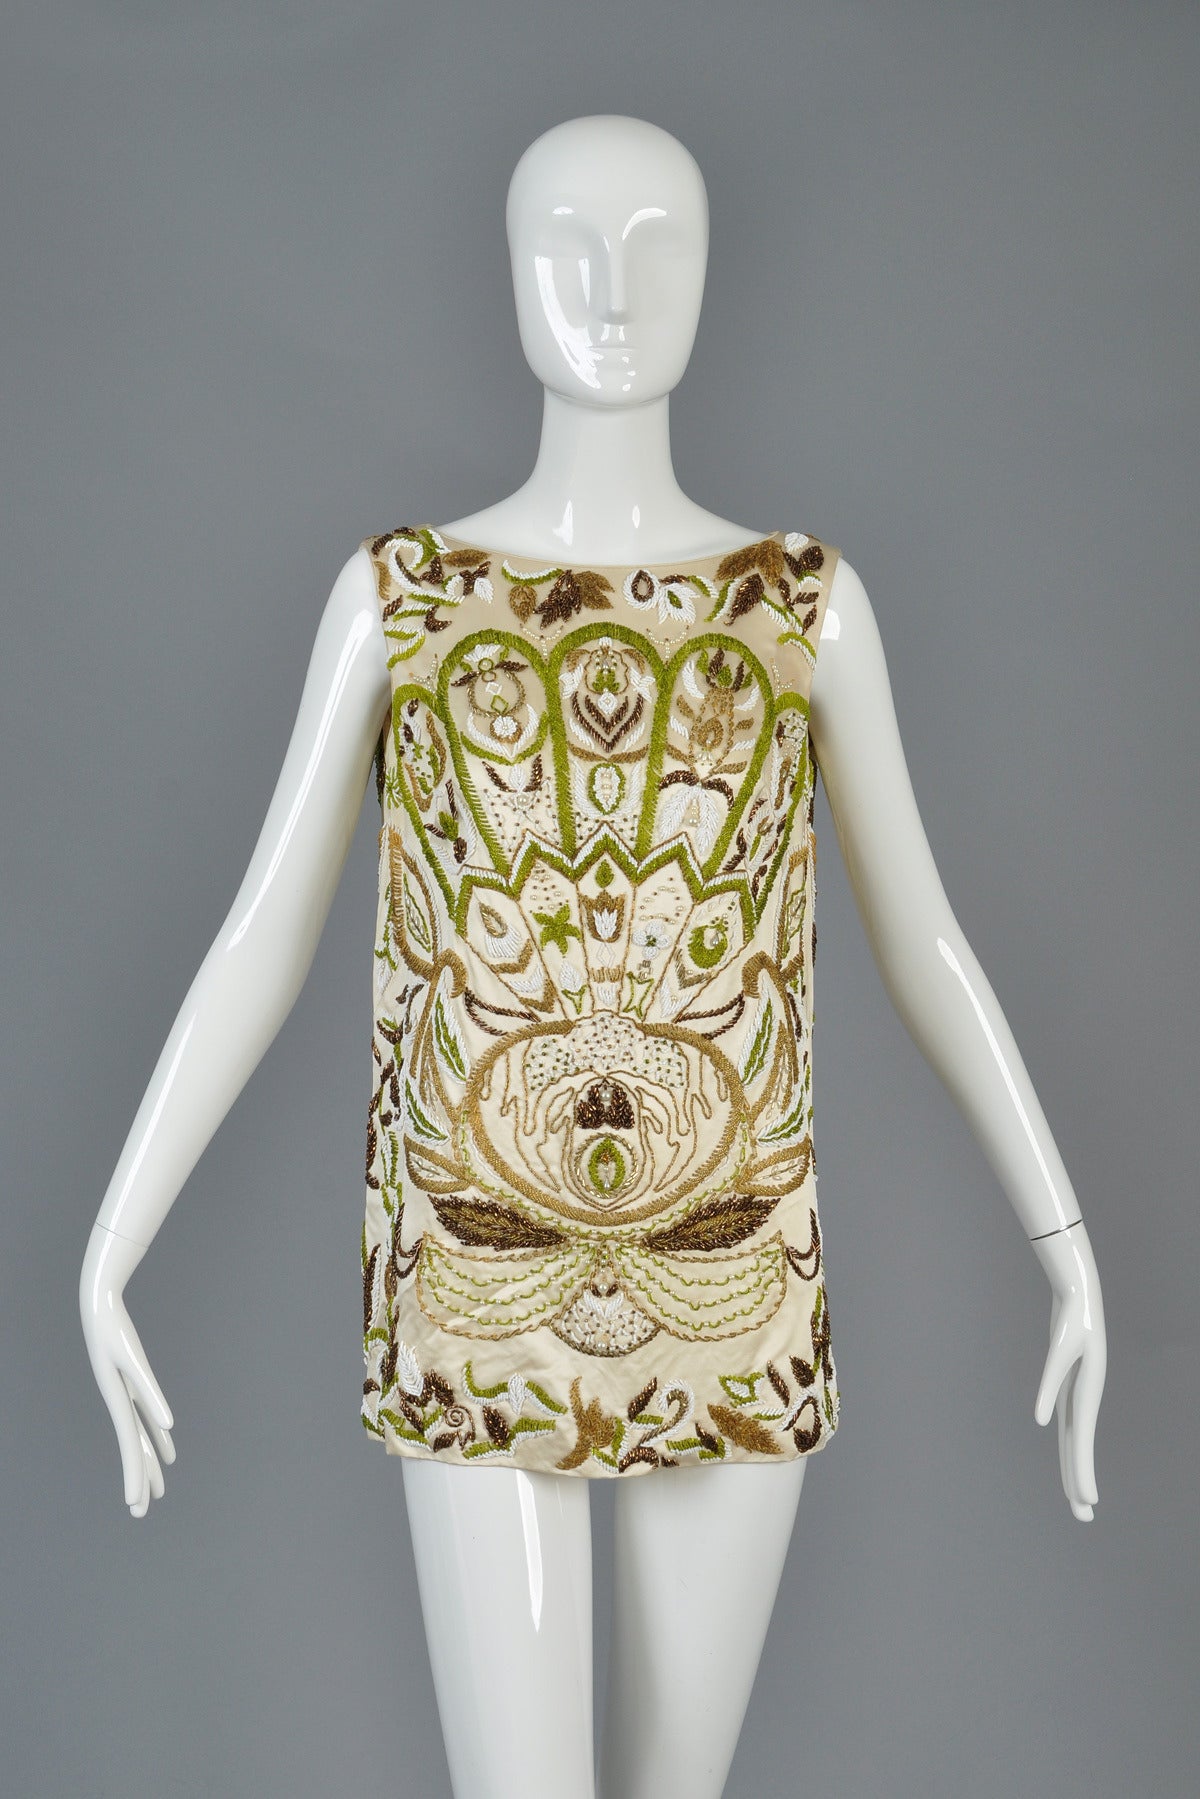 Truly incredible 1960s hand beaded silk tunic. Spectacular, rare find. A once in a lifetime find! Pale vanilla colored silk satin is fully hand-beaded with scalloped fanned and lotus flower motif. Metal zipper in the back. 

MEASUREMENTS
Bust: